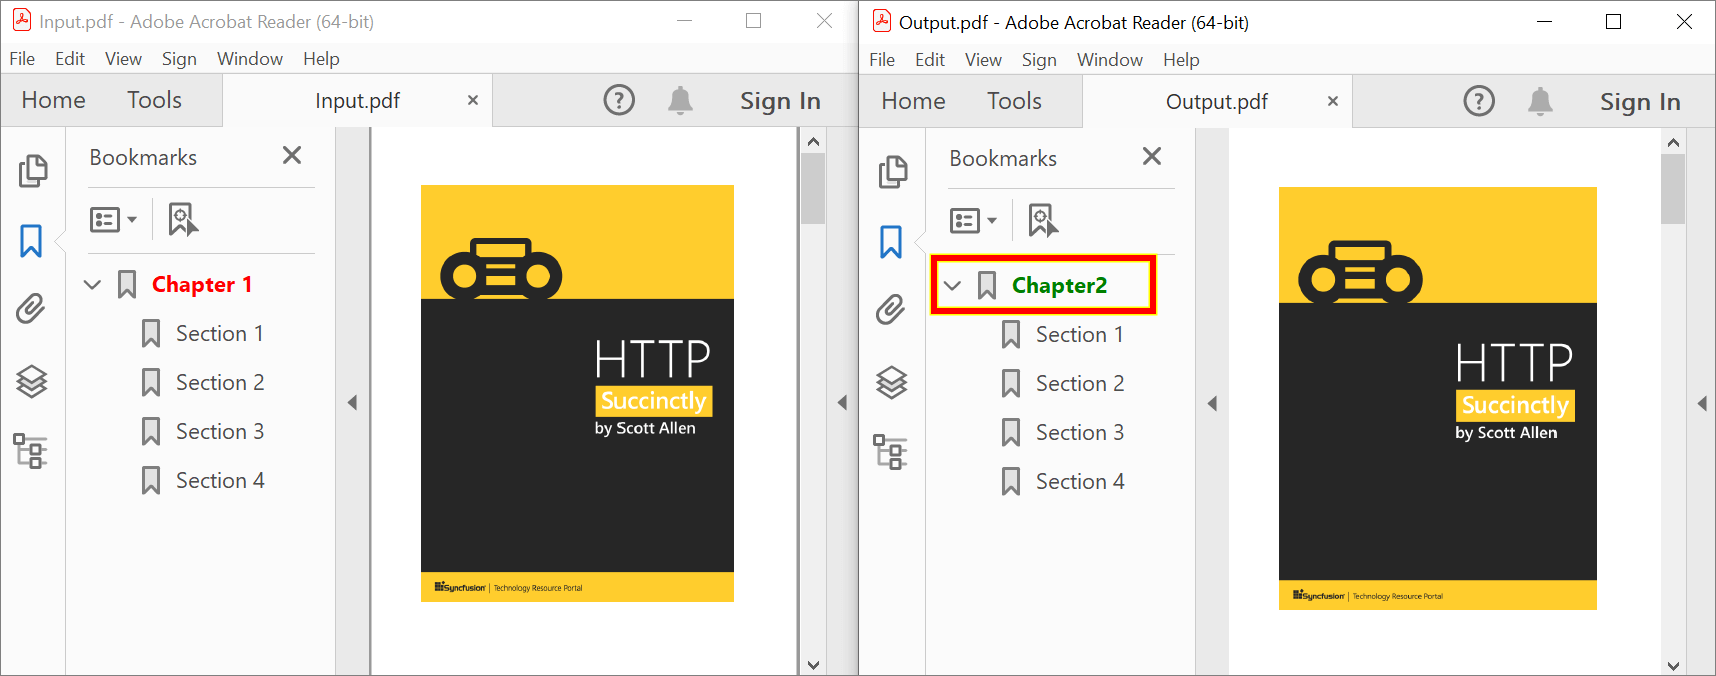 Modify and update the bookmarks in this PDF document